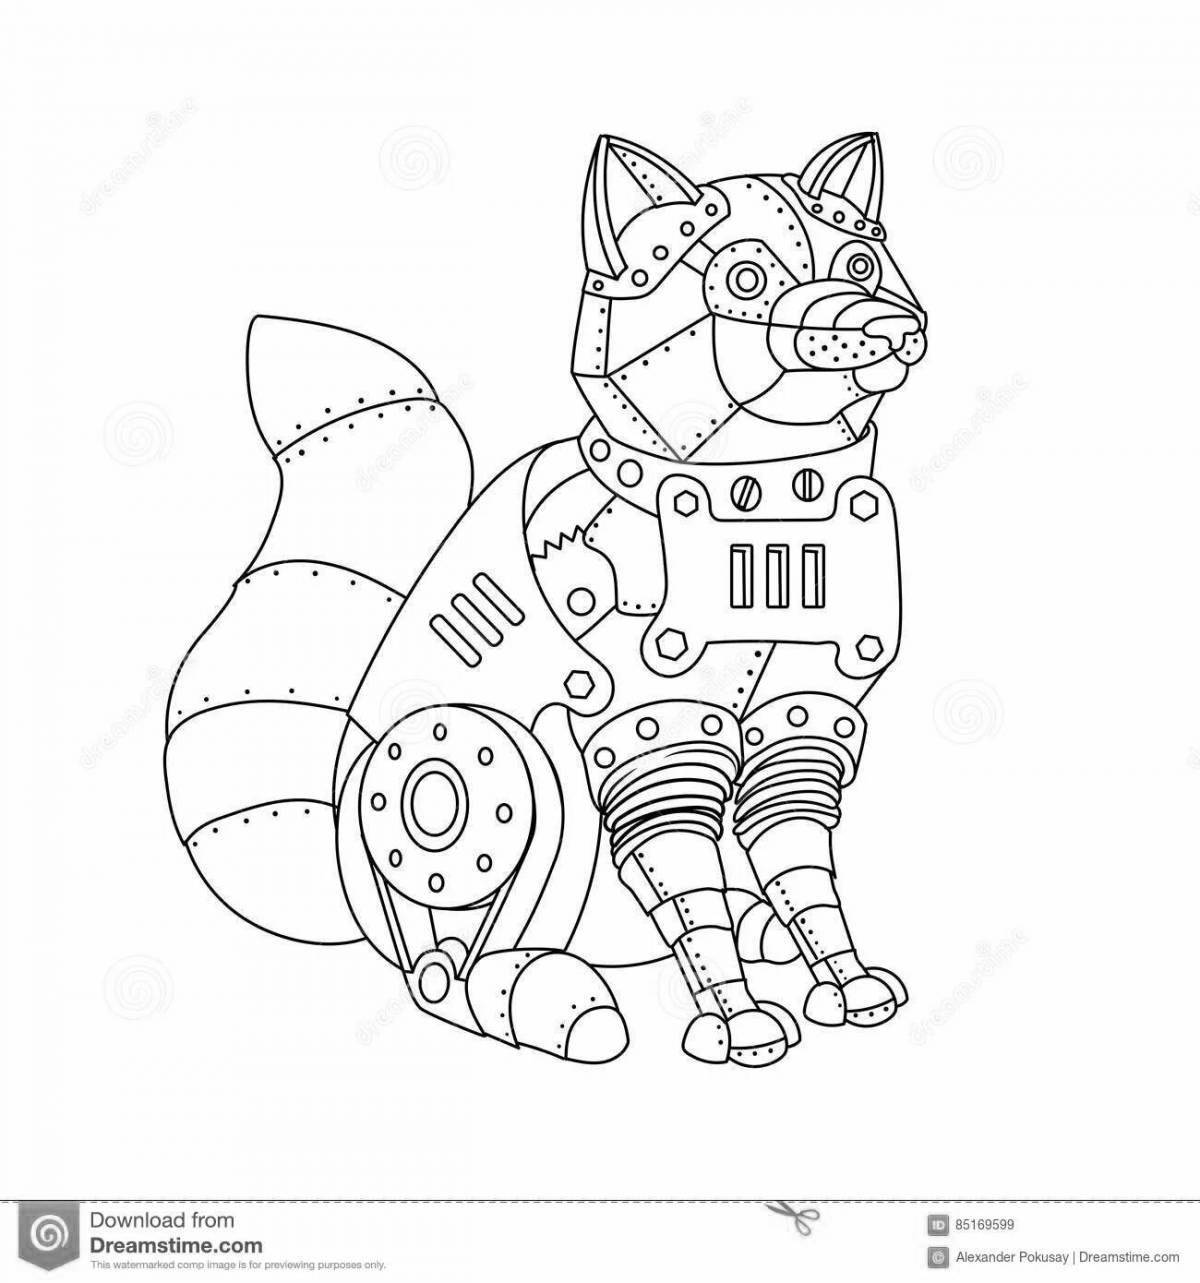 Awesome robot cat coloring page